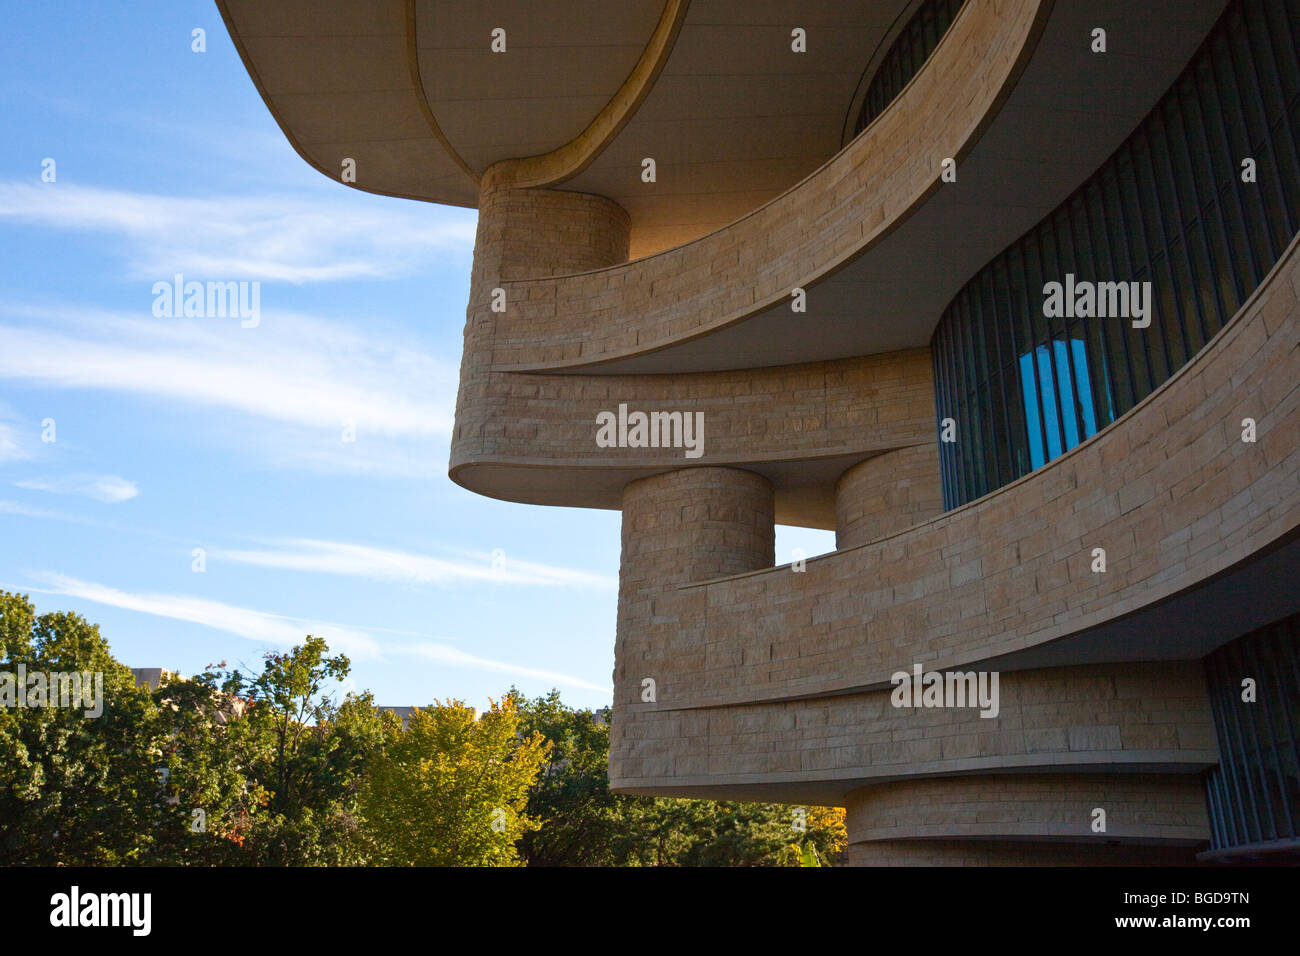 National Museum of the American Indian in Washington, D.C. Stockfoto